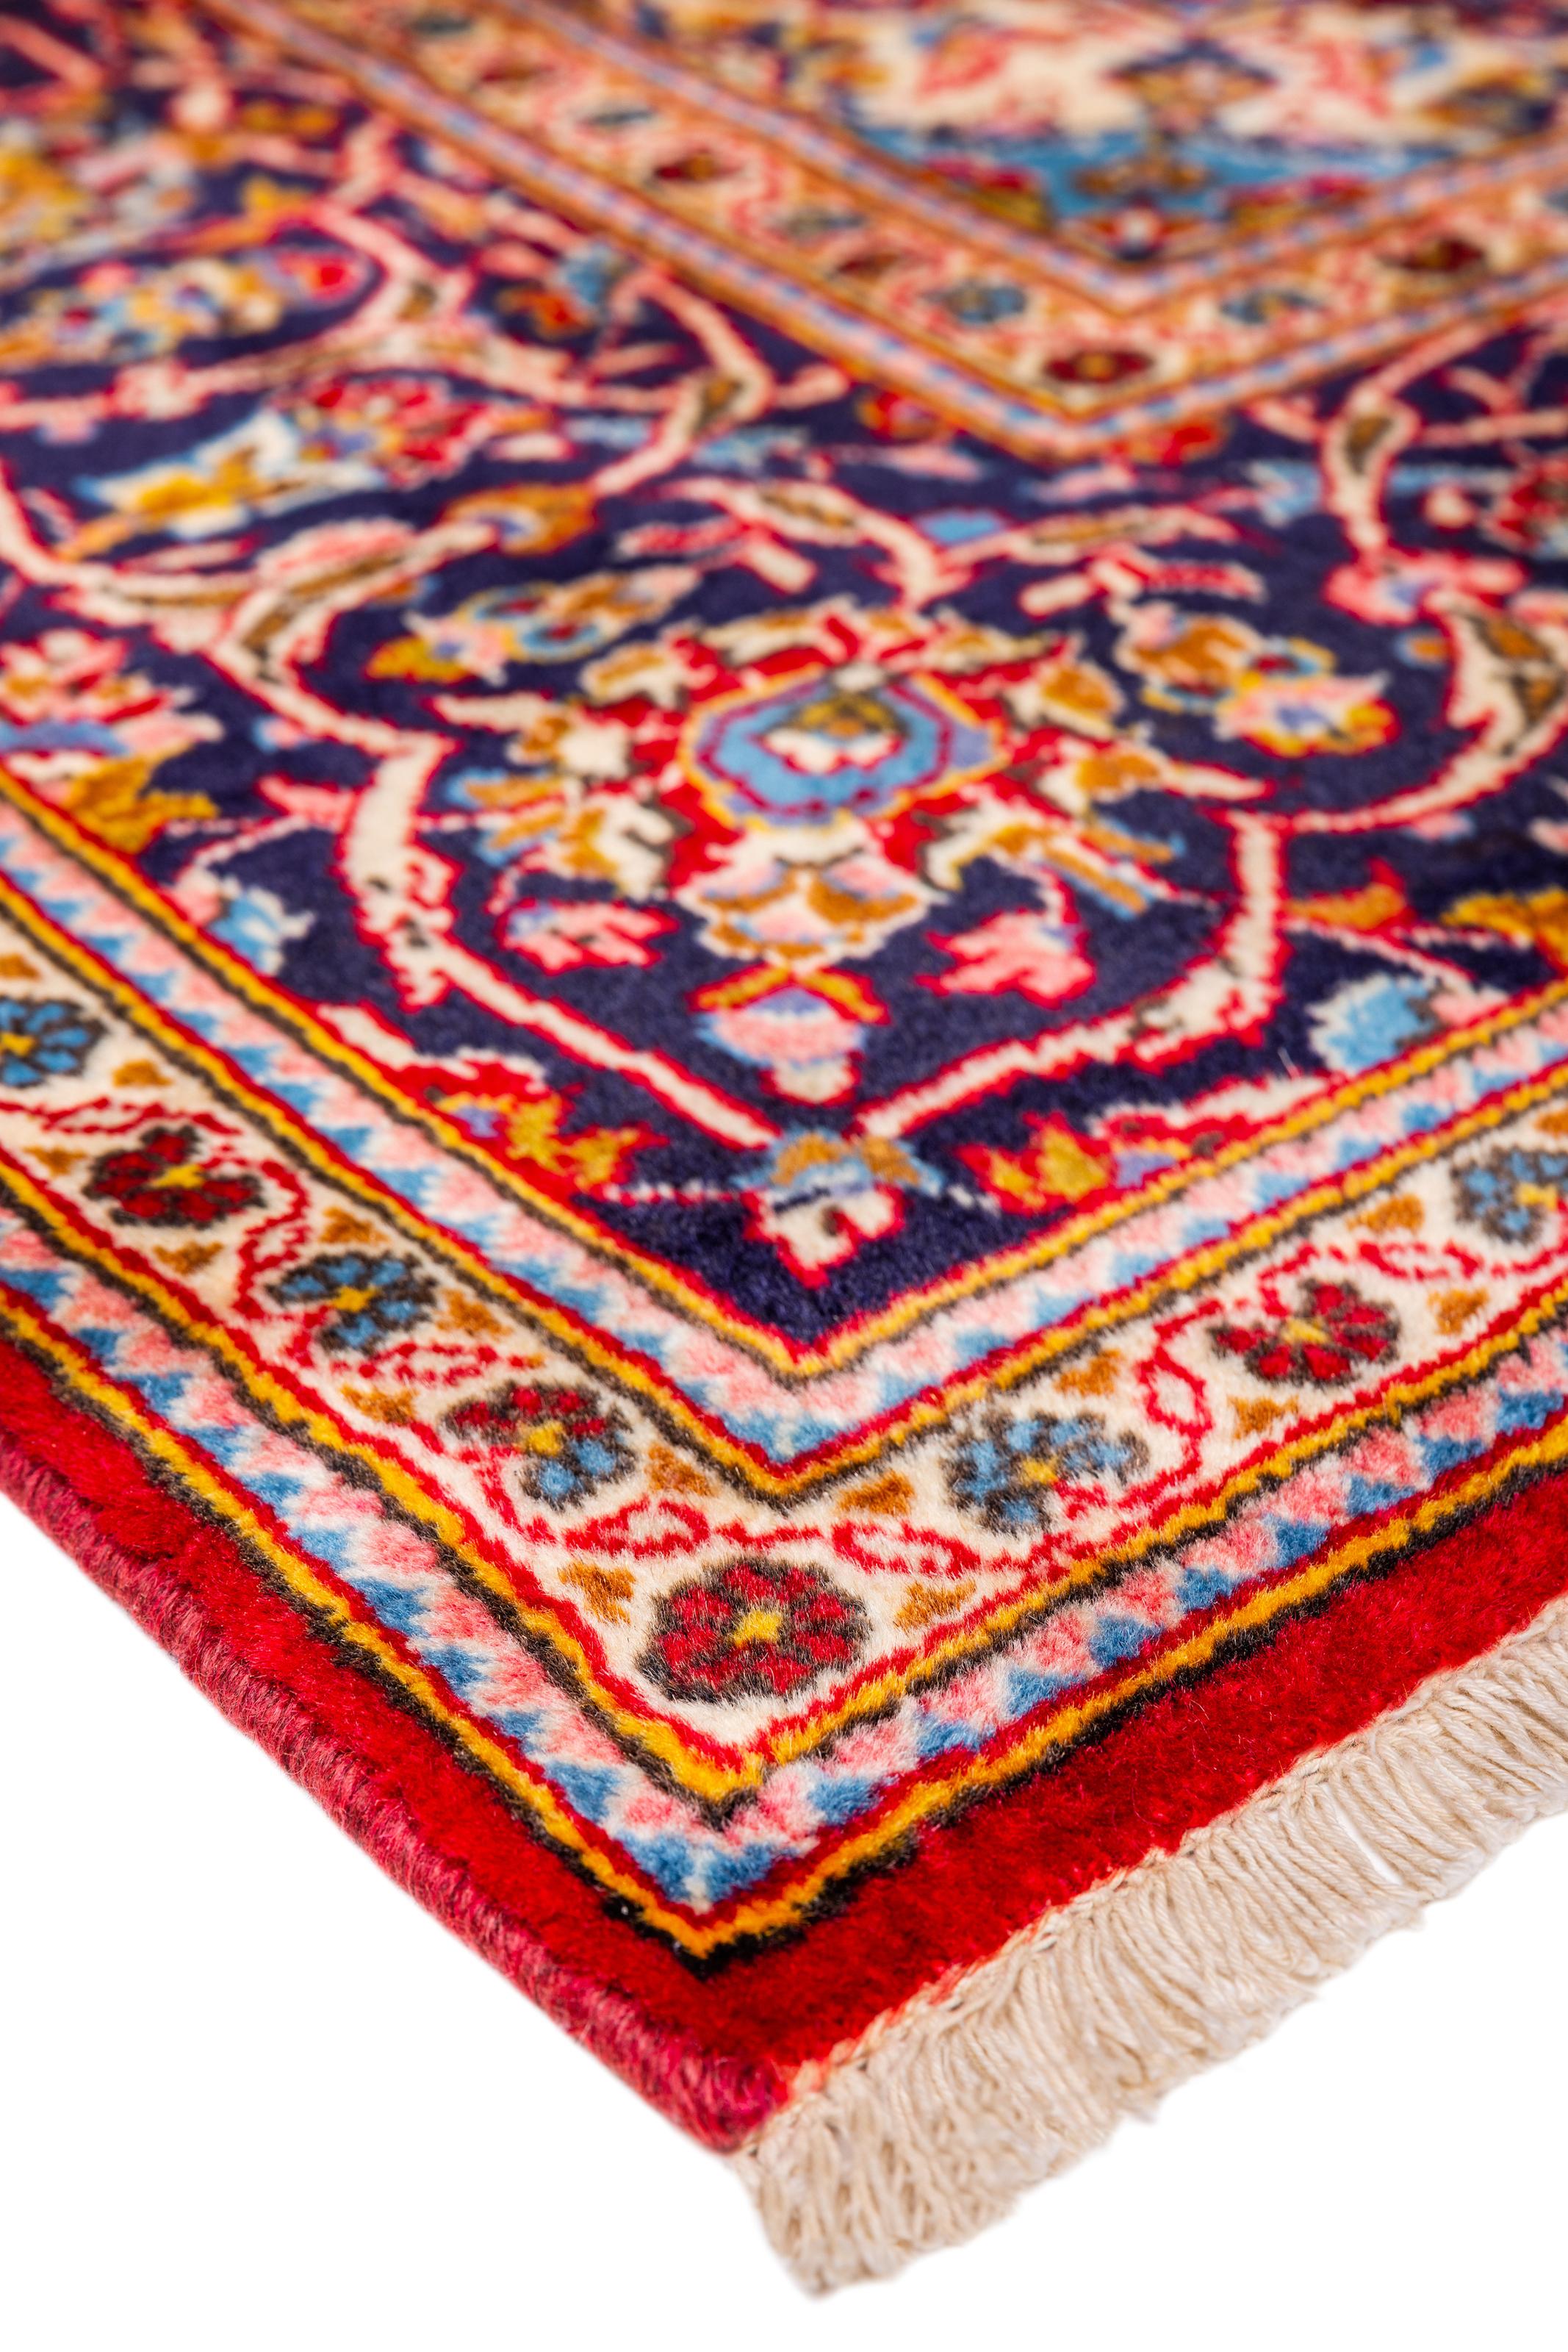 Renowned for their rich colors and interesting designs, Persian rugs are made with all natural wools and silk. Their beauty and the impact it will have on a home is endless.

Exact Dimensions: 9' 3